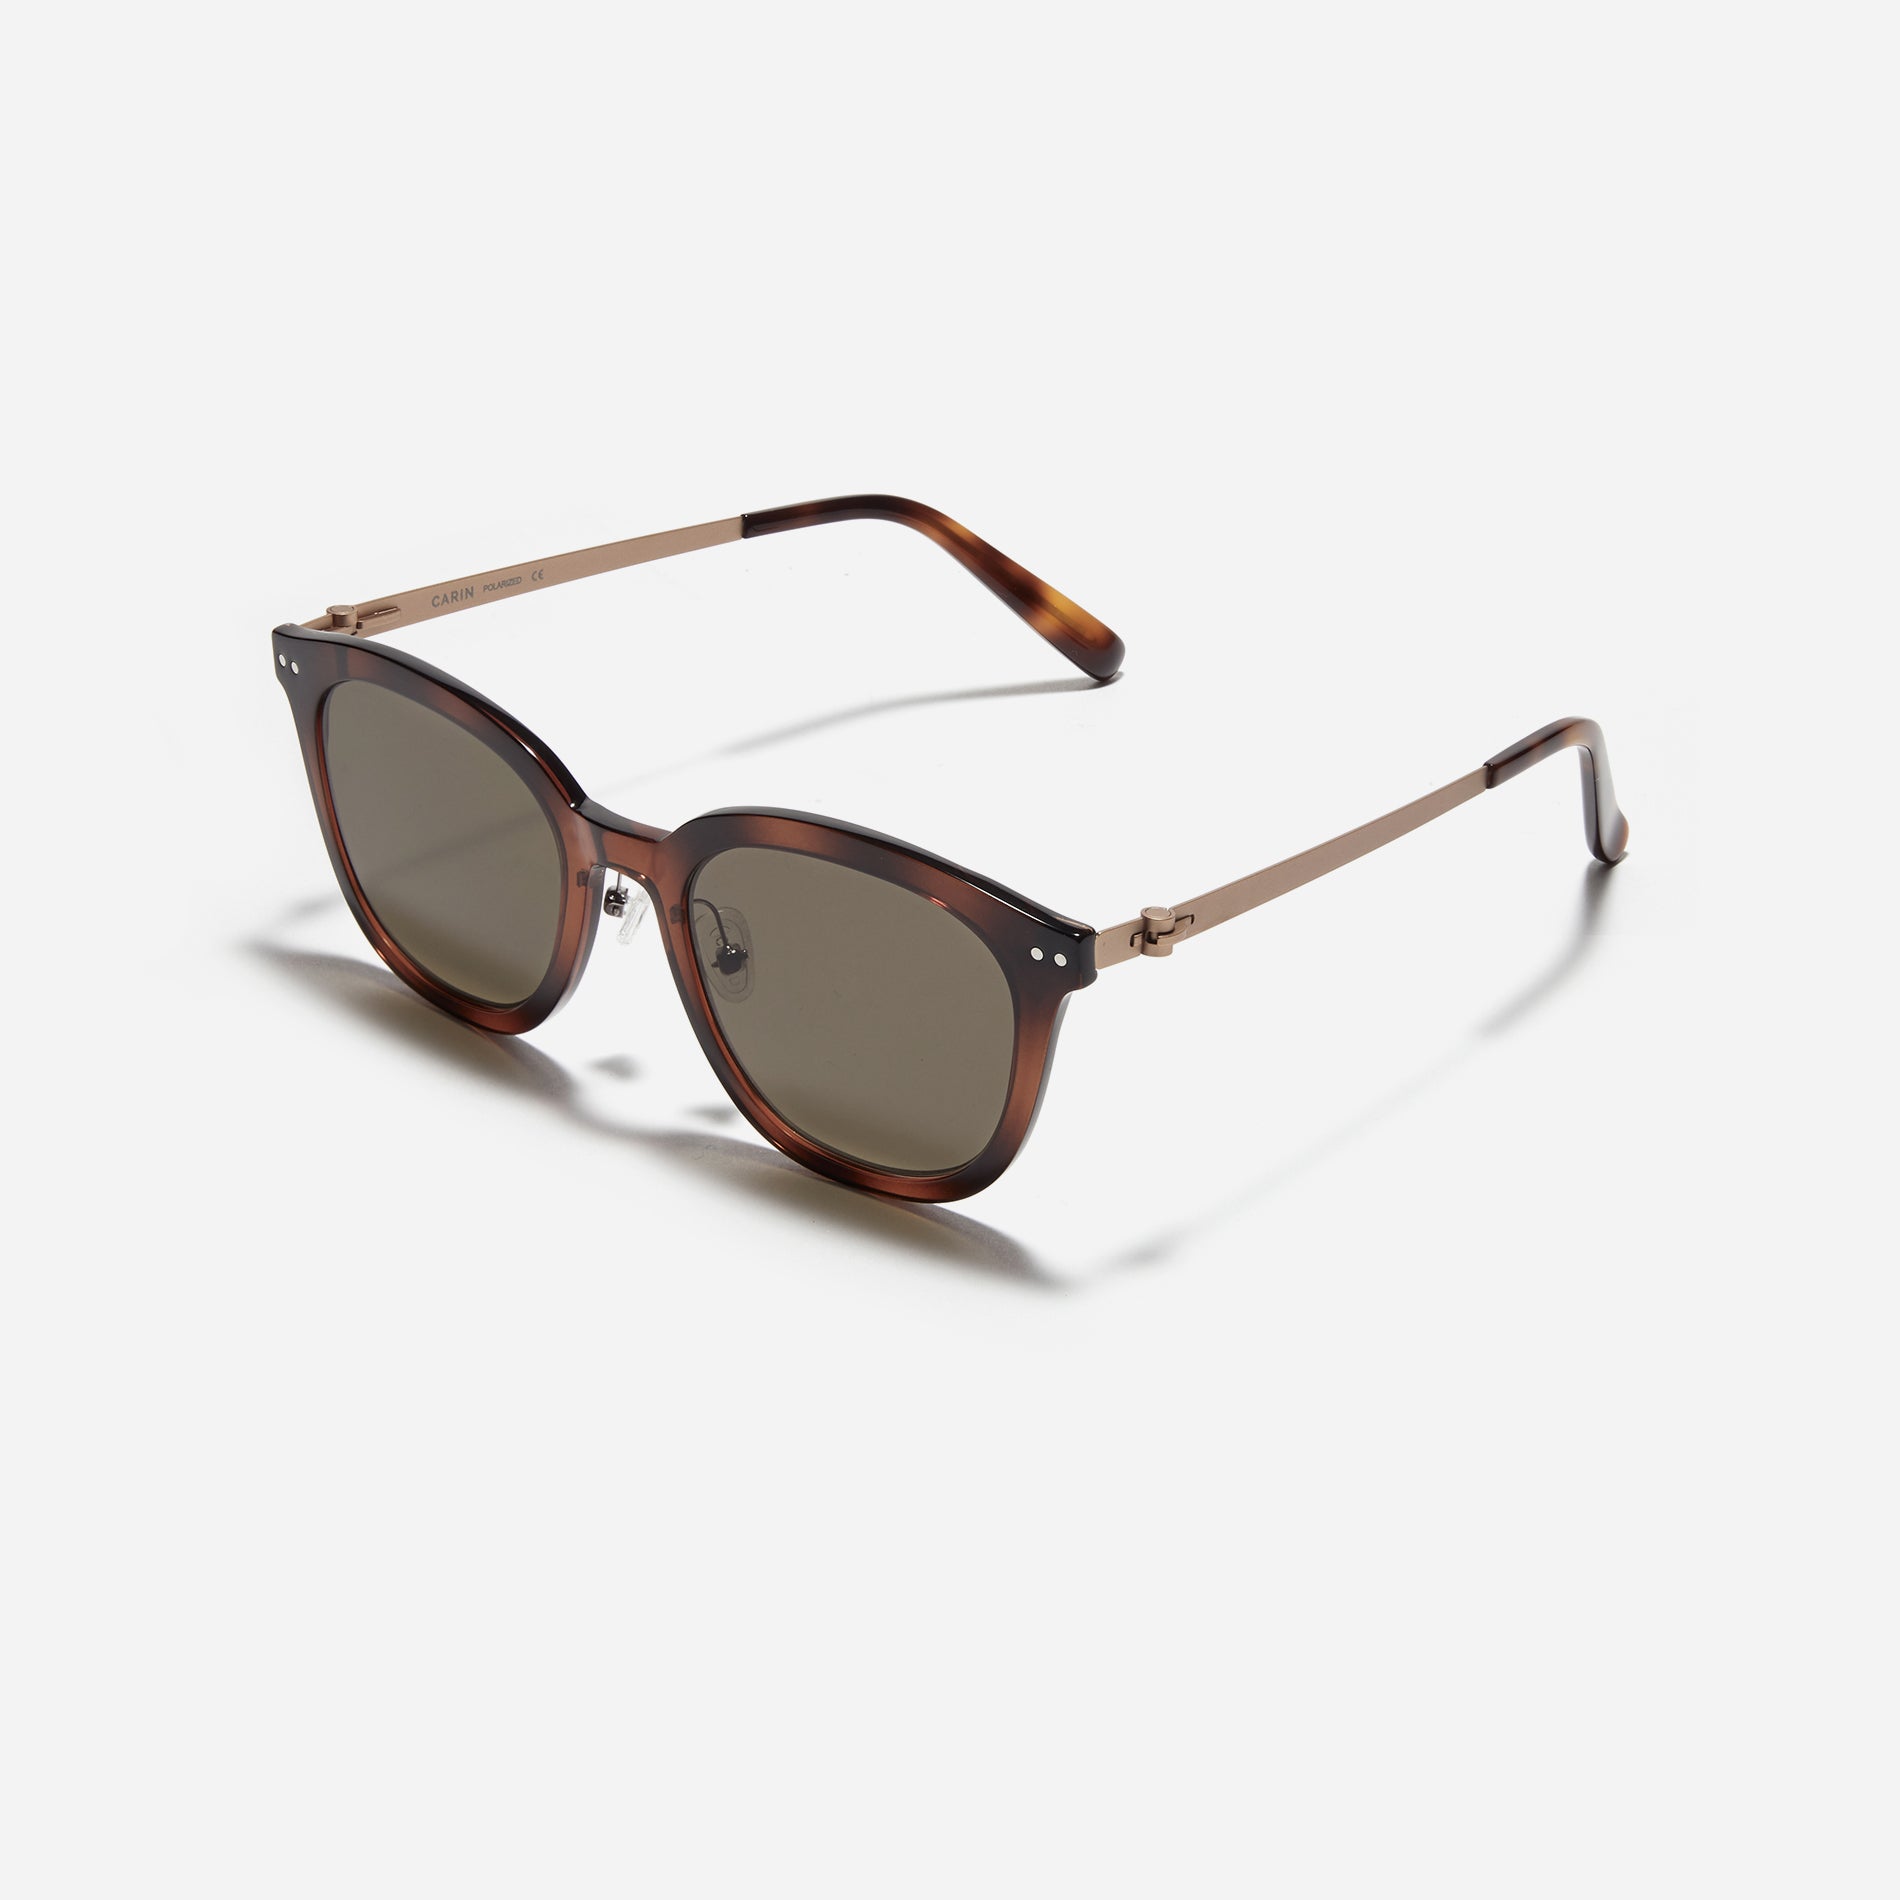 Square-shaped Boston sunglasses from the POLARIZED line. Crafted from lightweight and robust bio-plastic, the frame prevents slipping and offers enduring comfort with CARIN's patented screwless hinges.